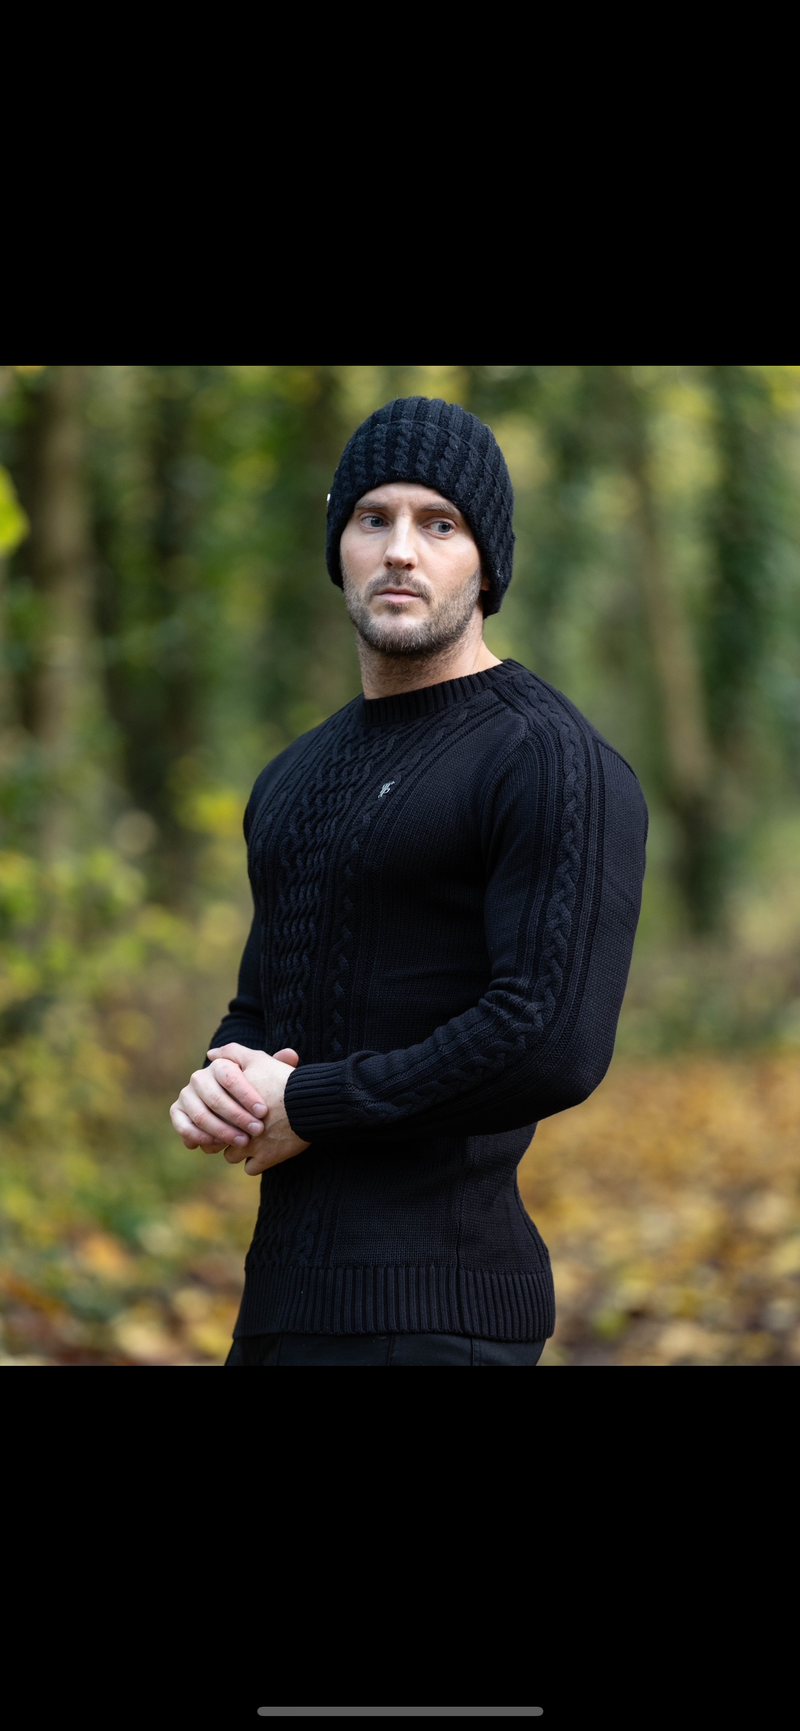 Father Sons Black Knitted Cable Saddle Crew Super Slim Sweater With Metal Decal - FSN073